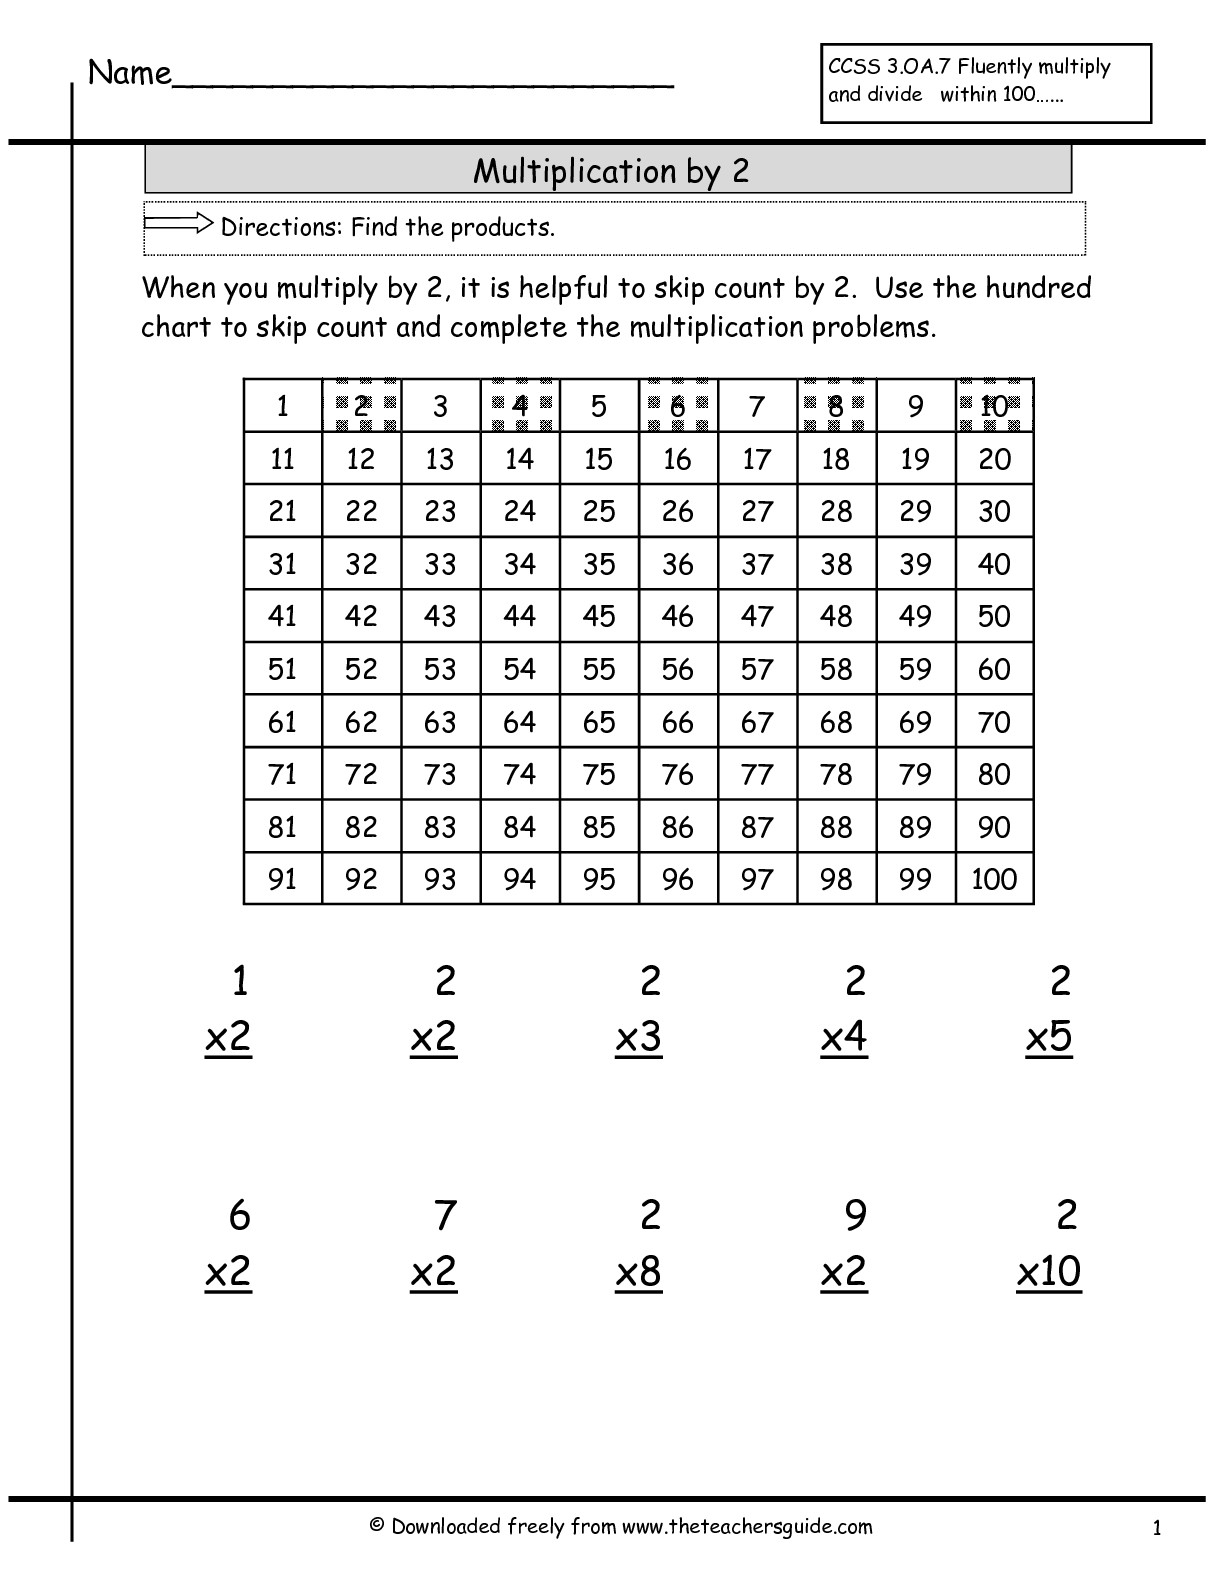 Multiplication Facts Worksheets From The Teacher's Guide inside Printable Multiplication Facts Chart